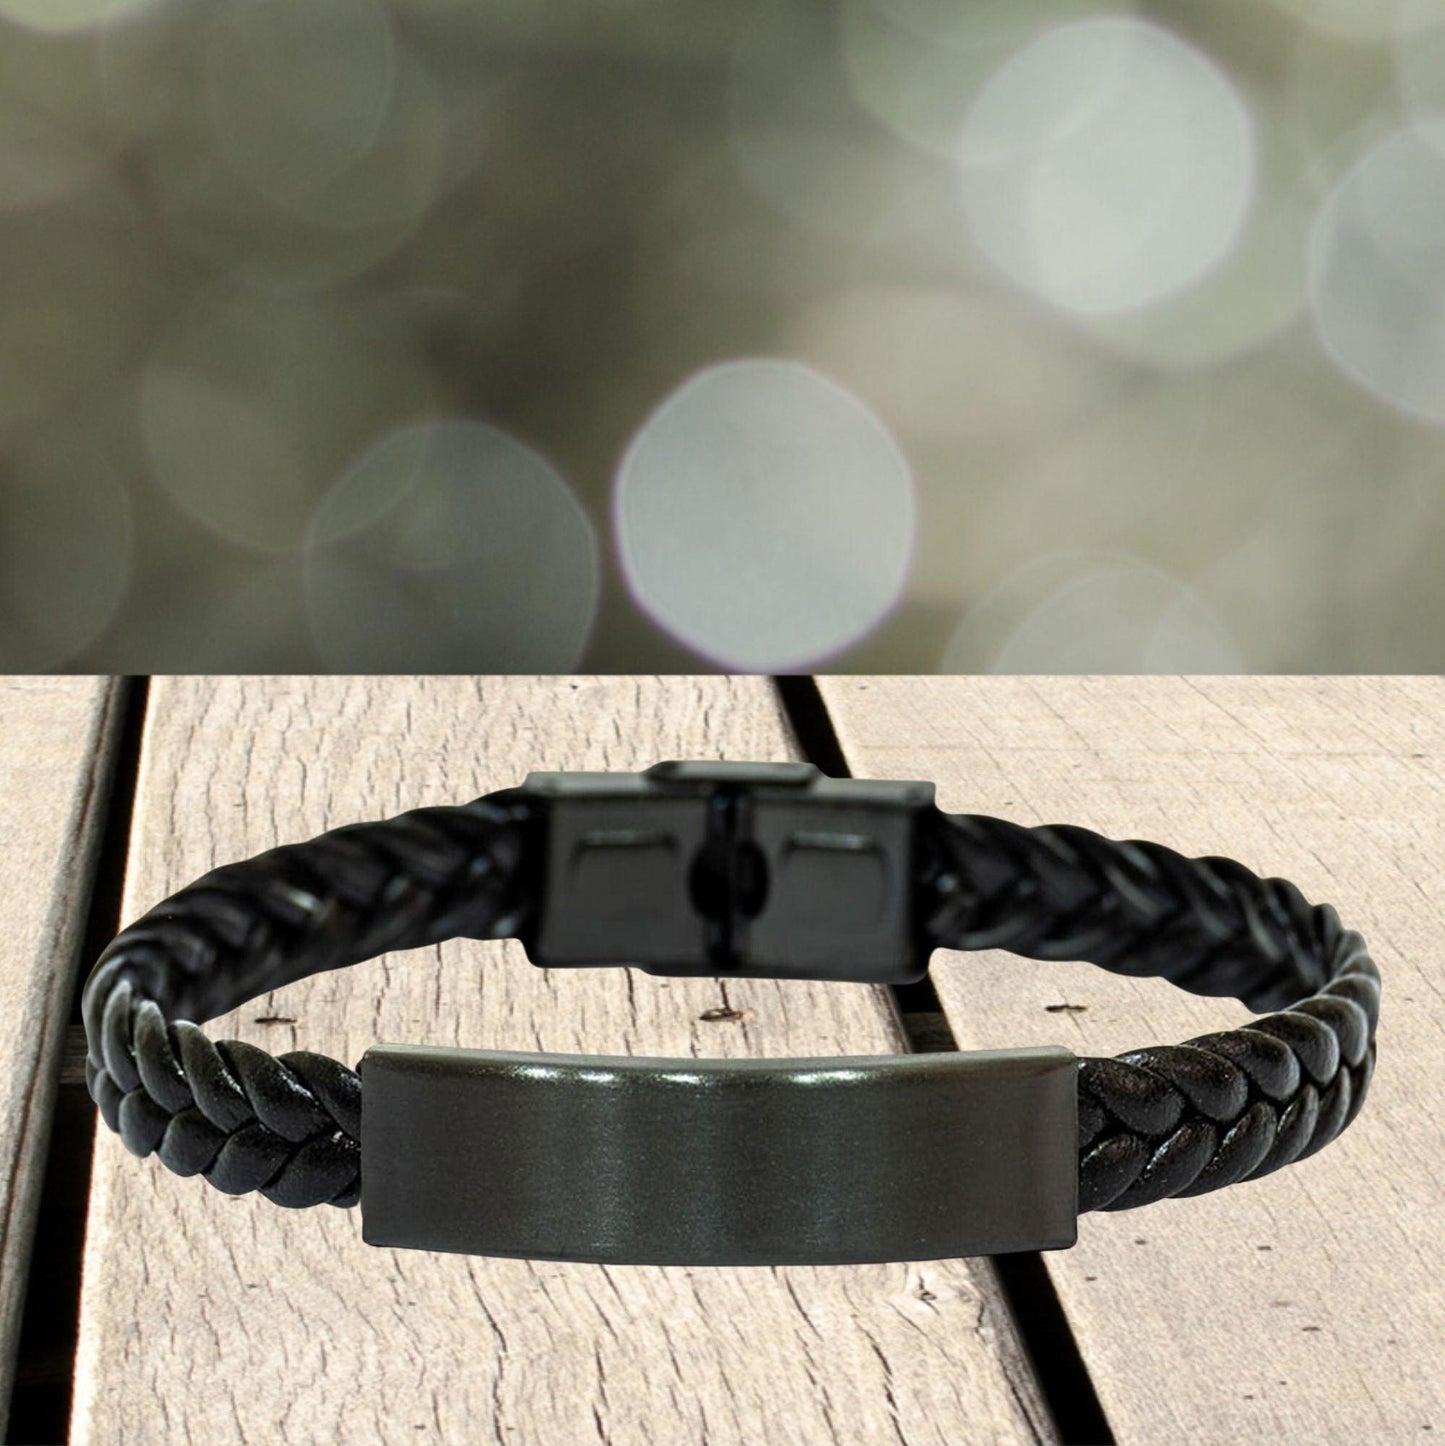 Remarkable Database Administrator Gifts, Your dedication and hard work, Inspirational Birthday Christmas Unique Braided Leather Bracelet For Database Administrator, Coworkers, Men, Women, Friends - Mallard Moon Gift Shop